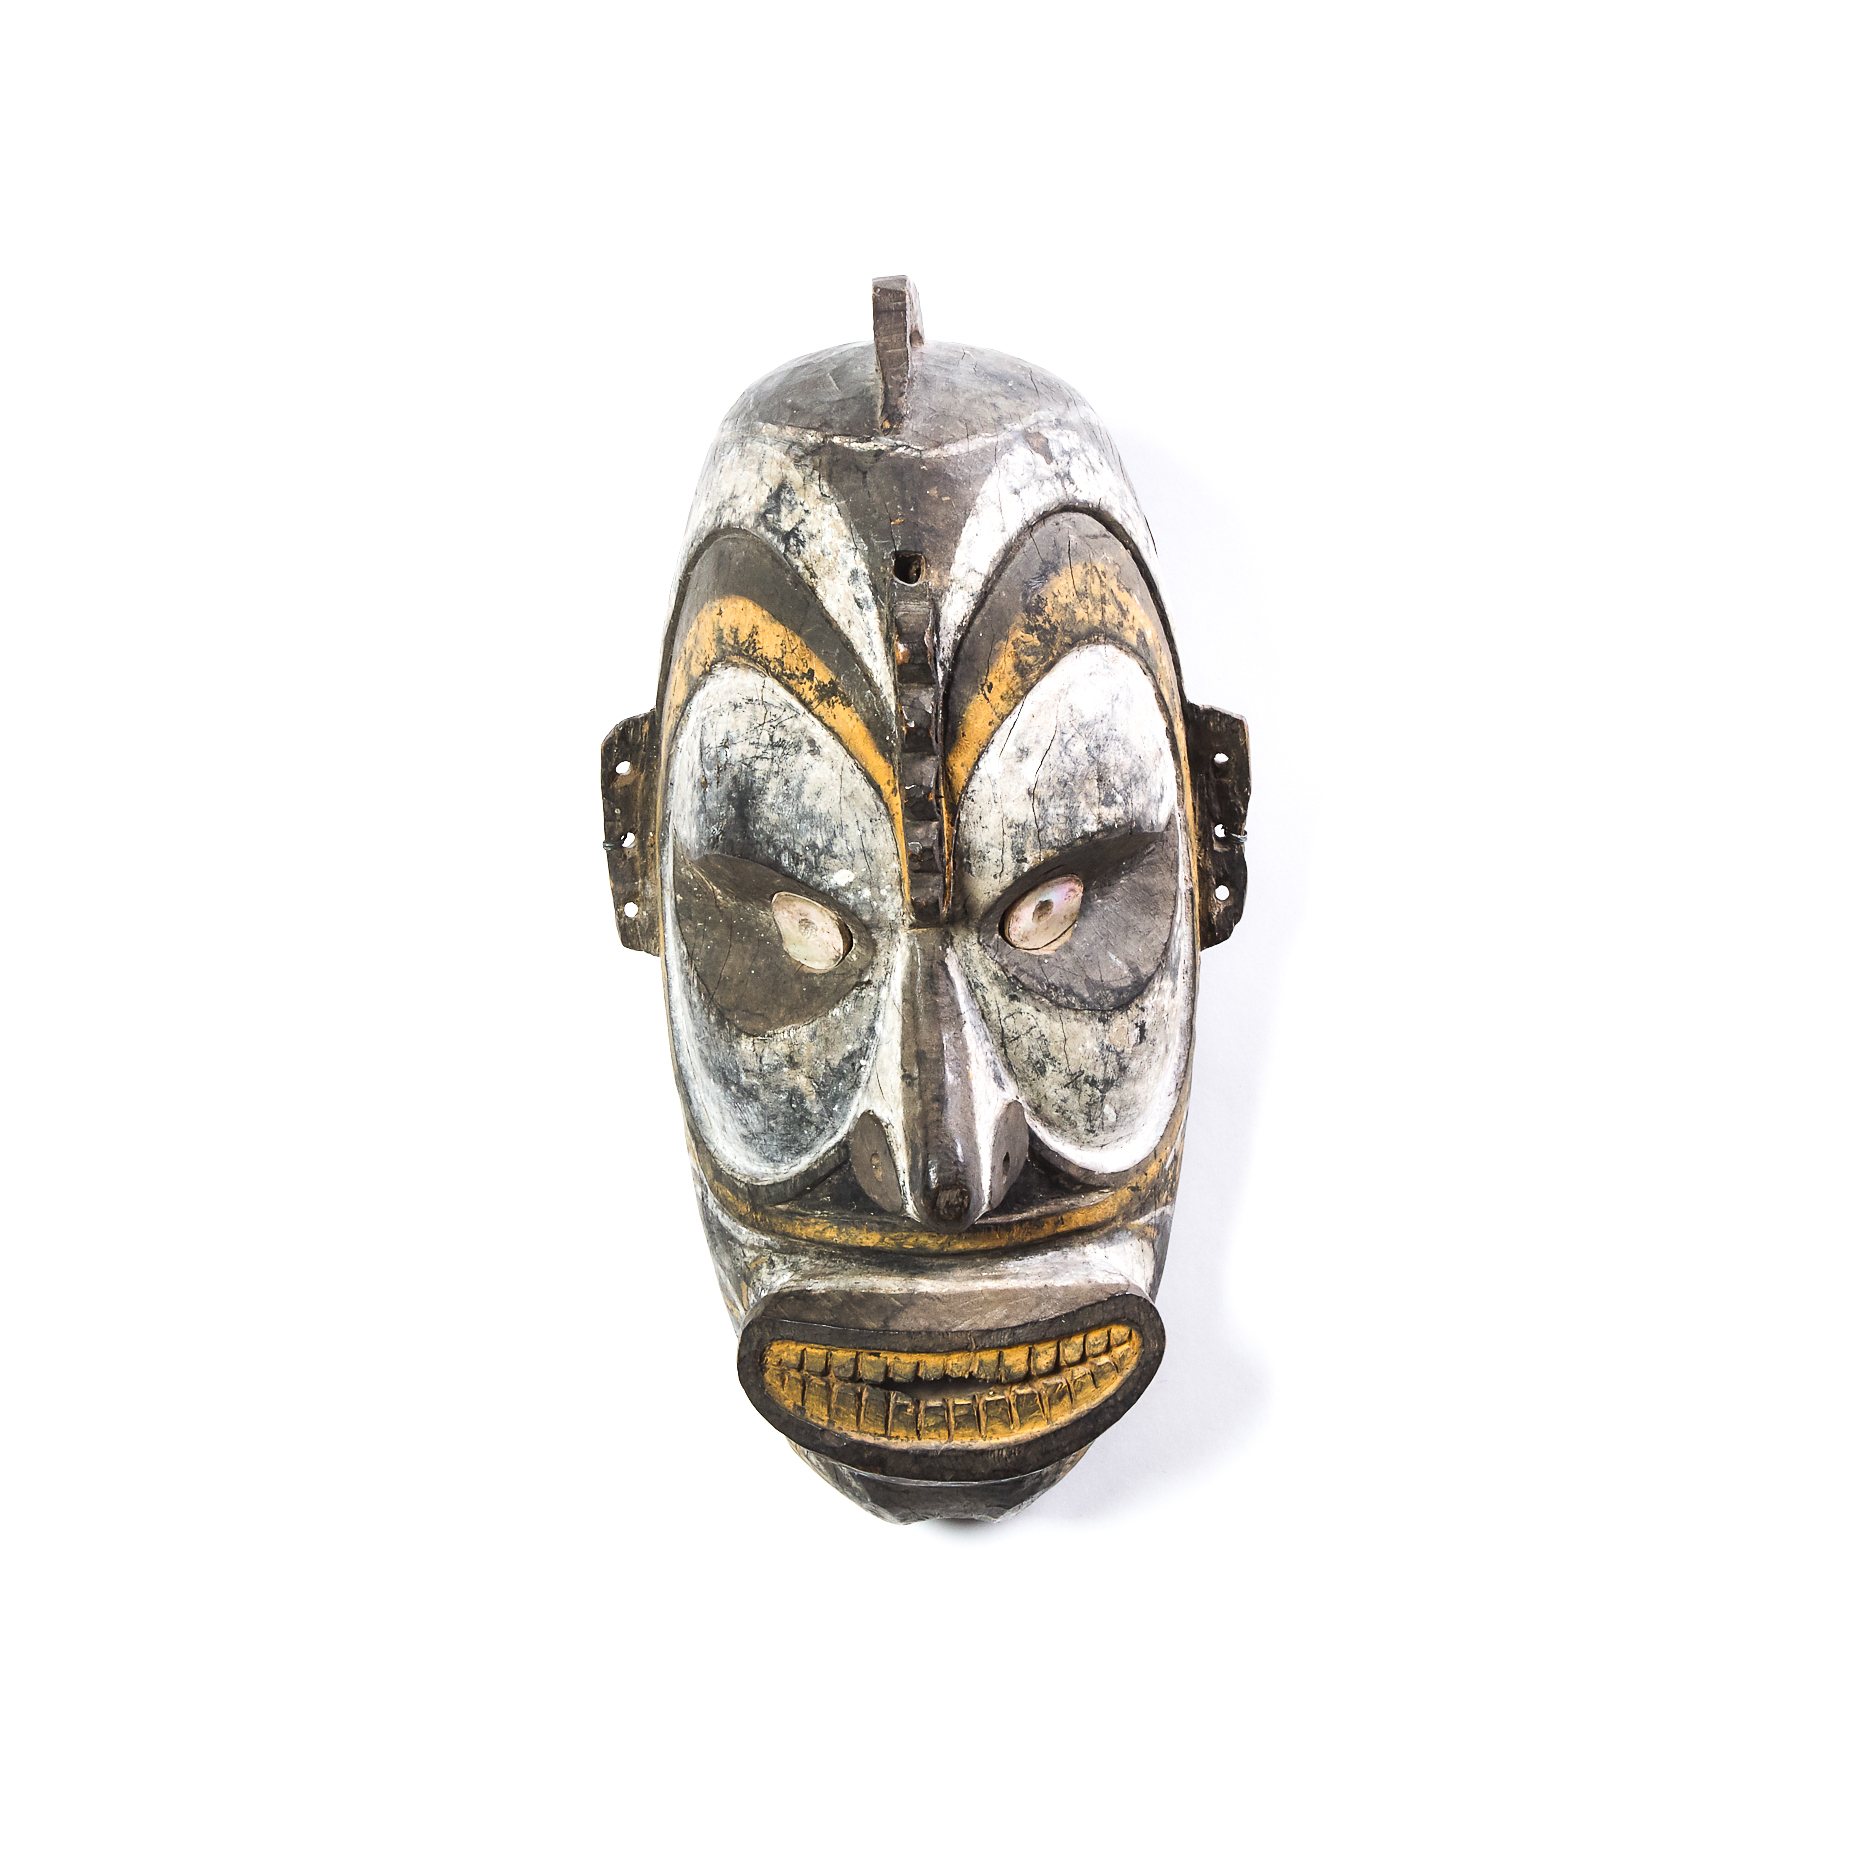 Unidentified Mask, possibly Papua New Guinea, mid to late 20th century